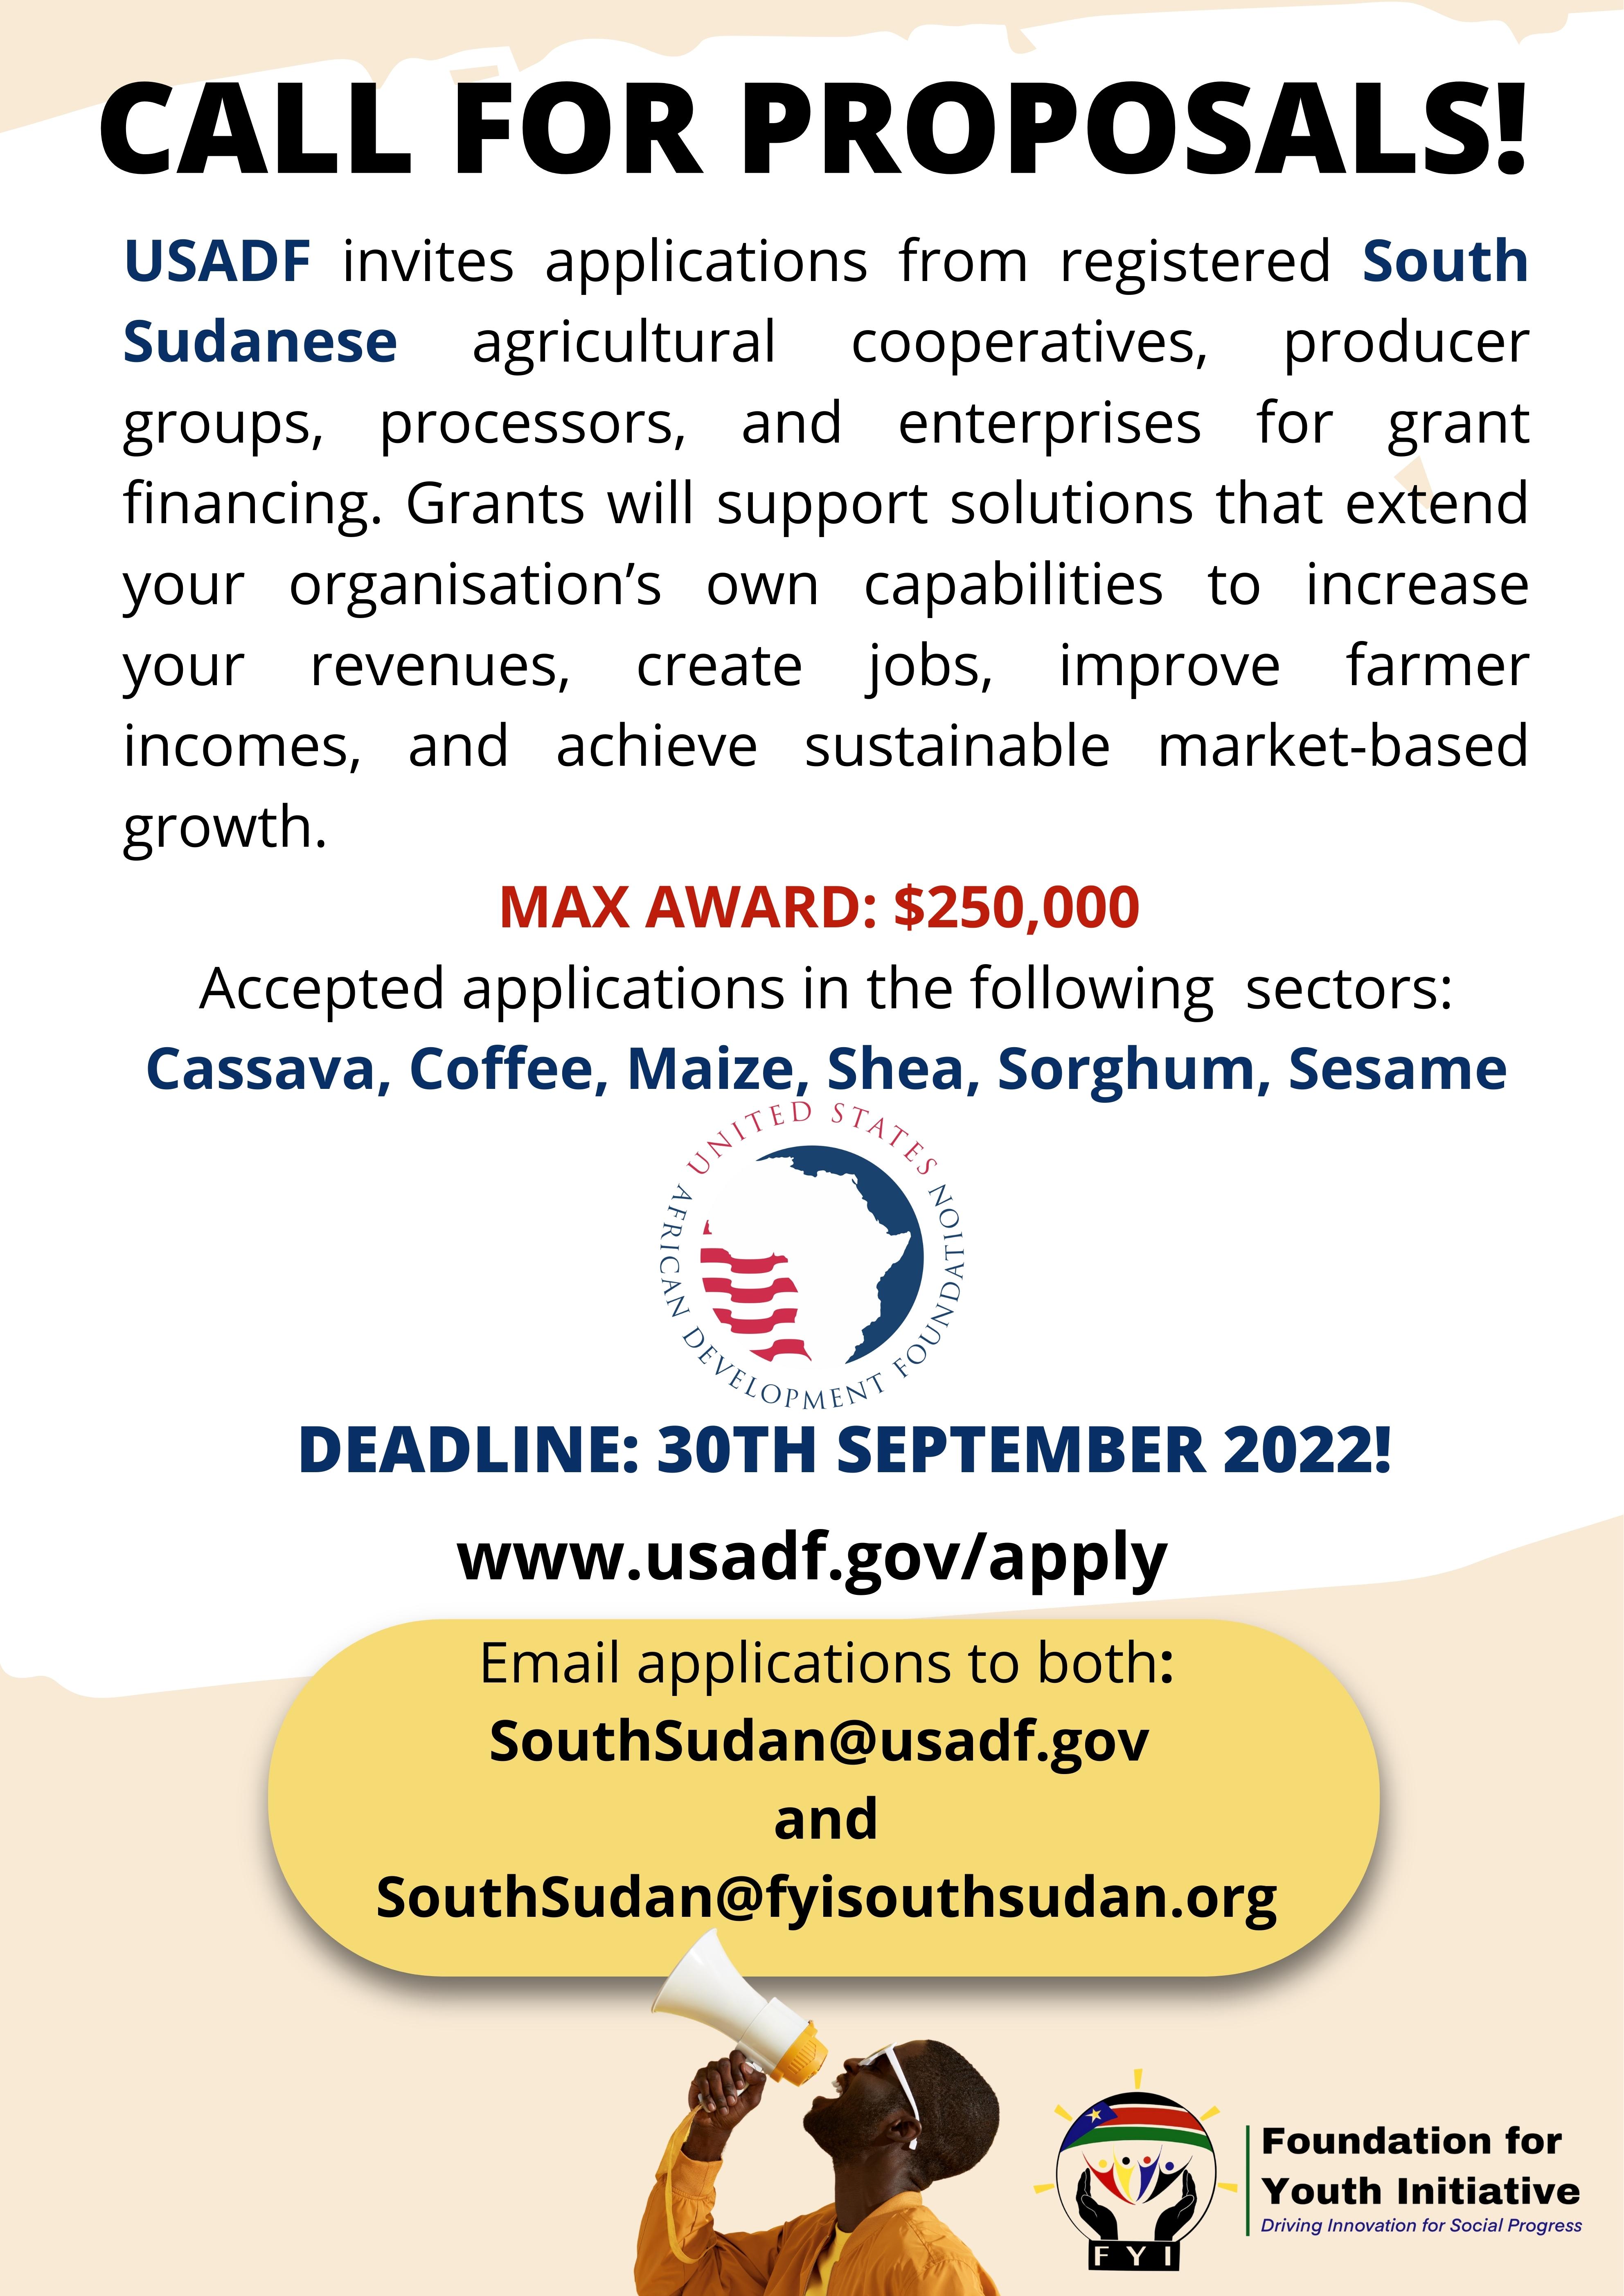 CALL FOR PROPOSALS WITH UNITED STATES AFRICAN DEVELOPMENT FOUNDATION